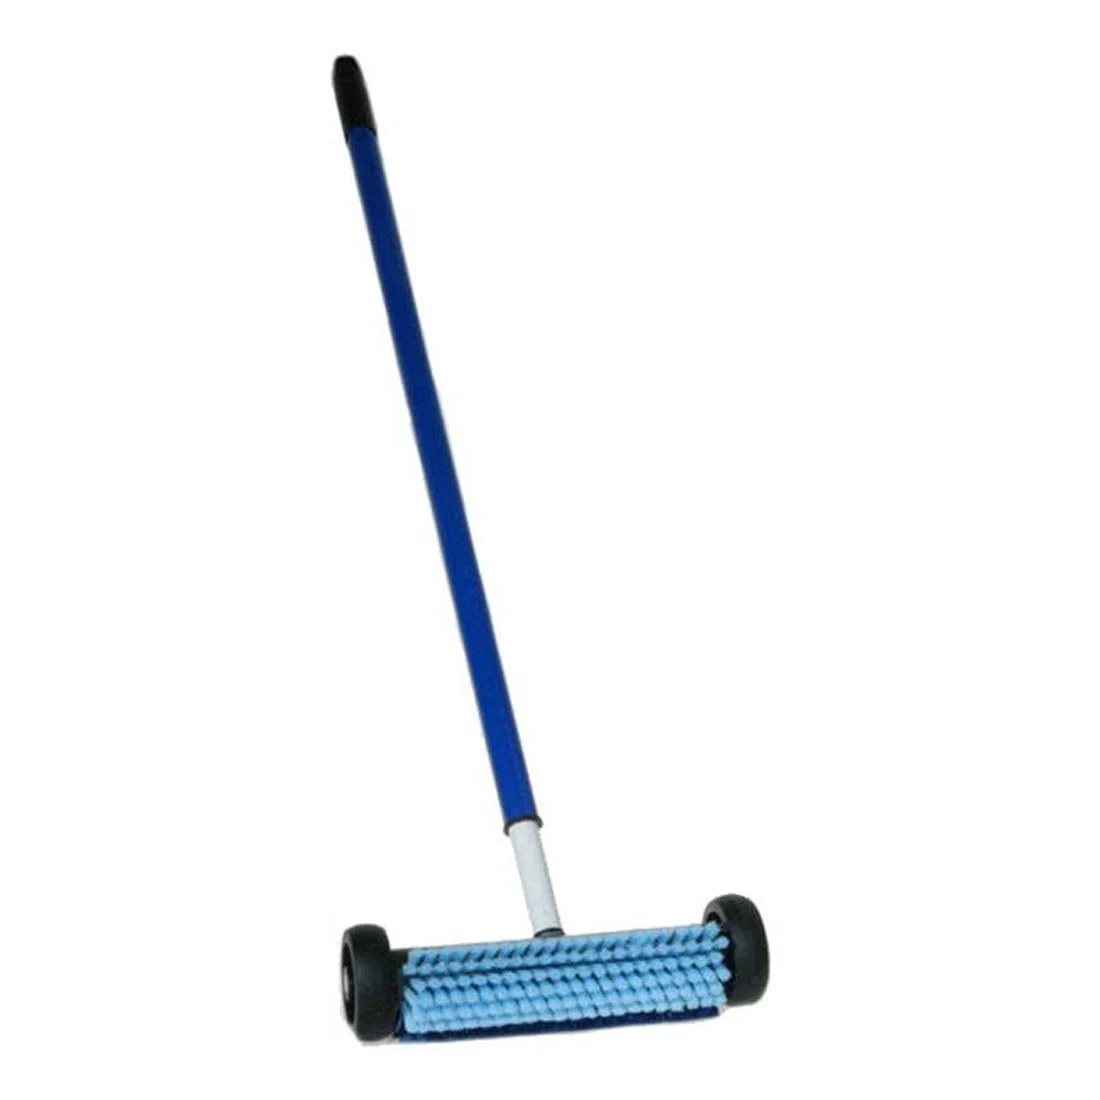 SEBO Duo Daisy Brush Dry Carpet Cleaner - All About Vacuums